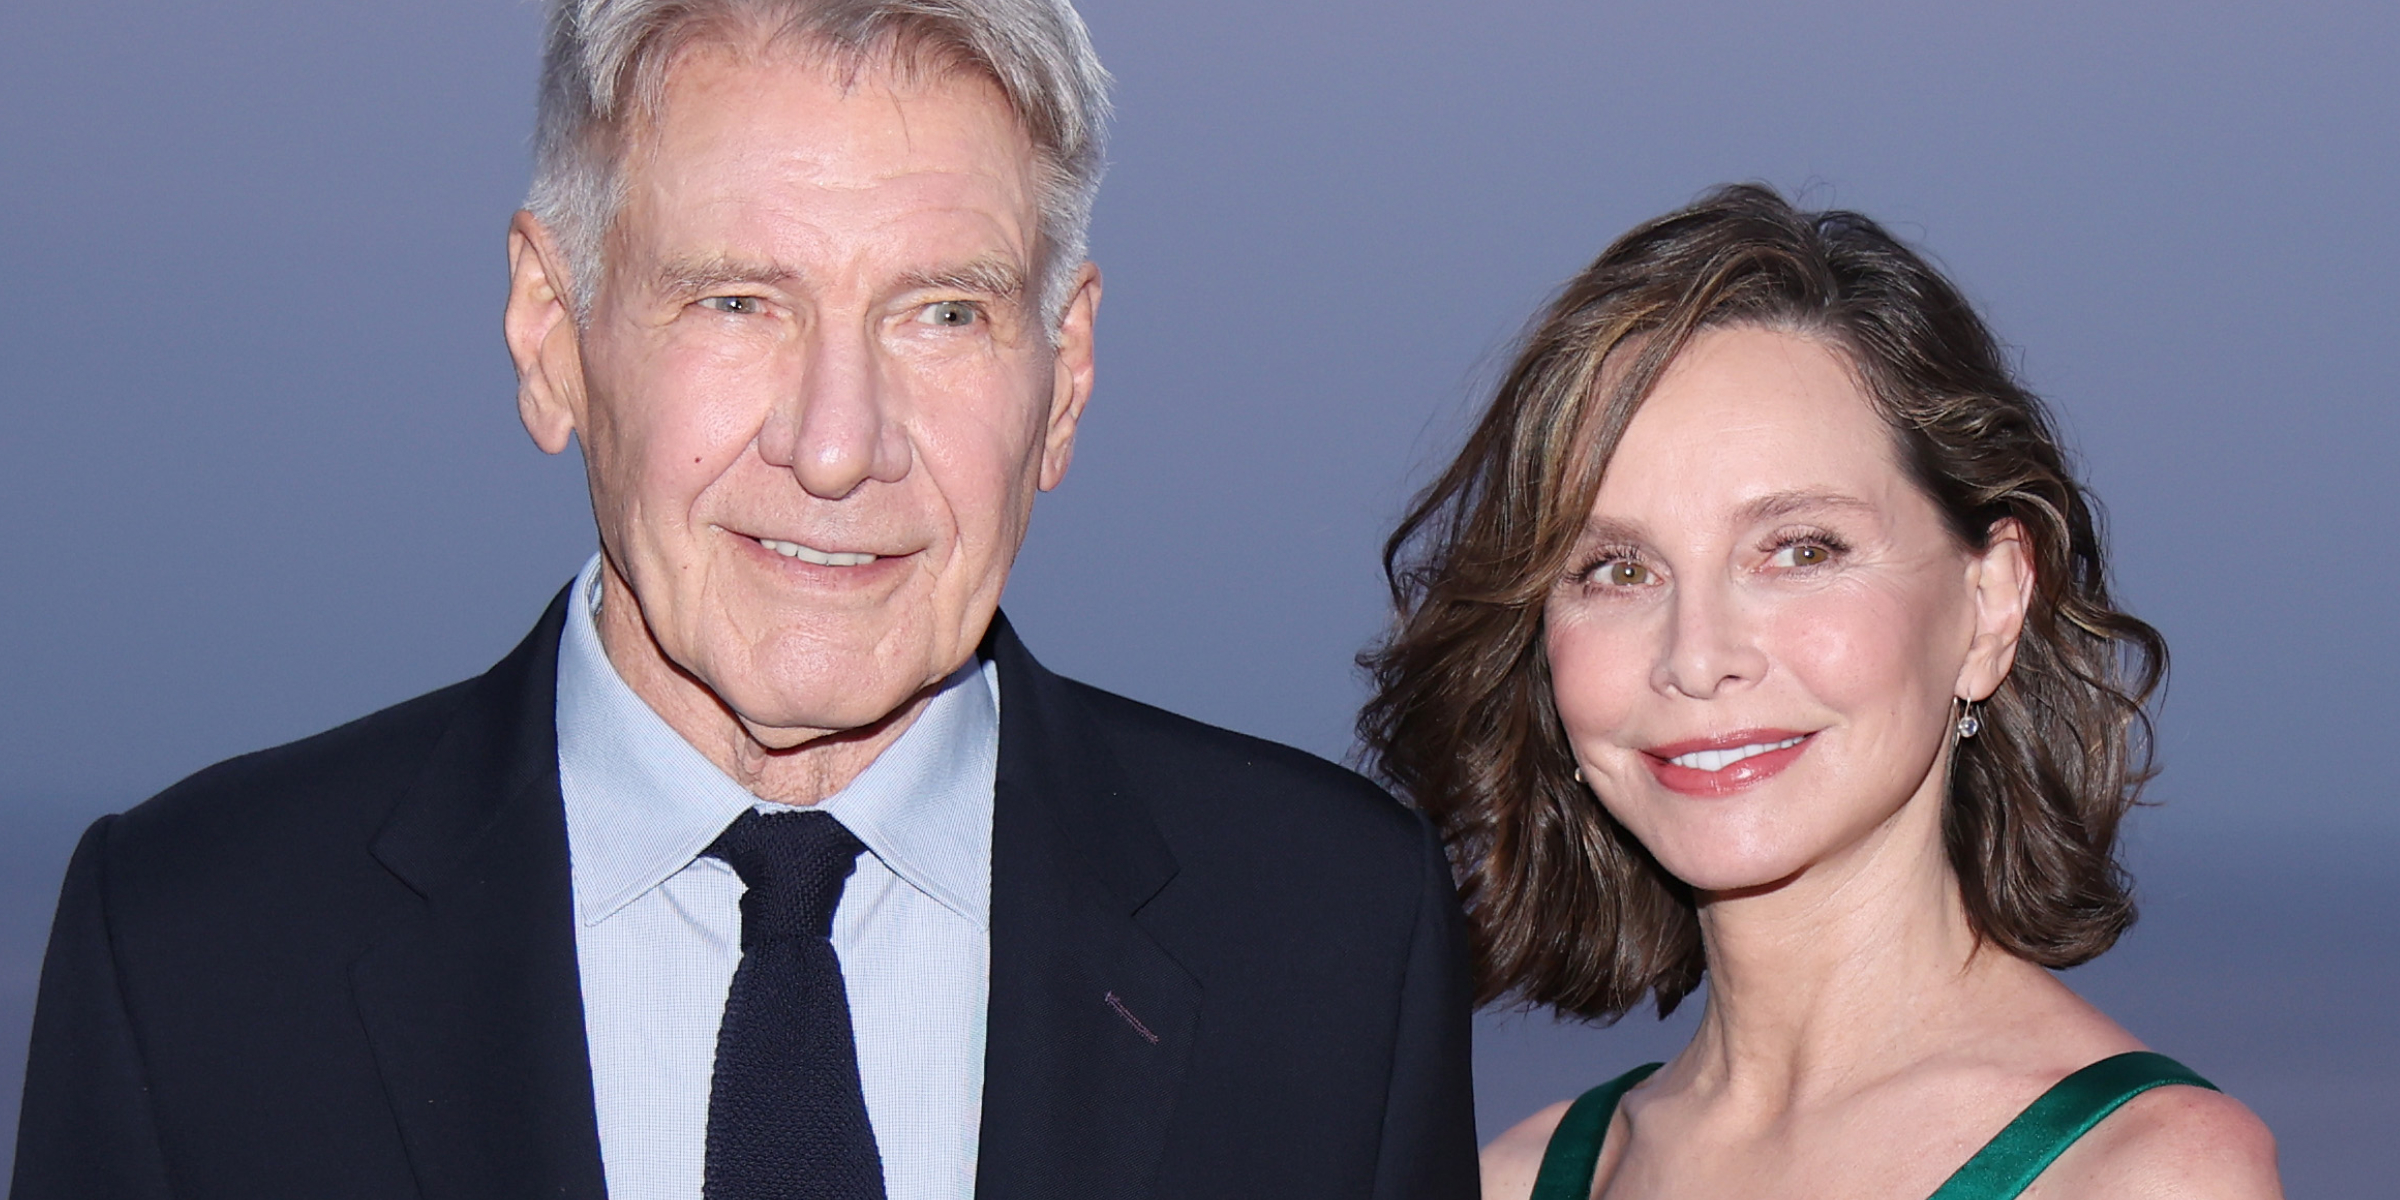 Harrison Ford and Calista Flockhart | Source: Getty Images